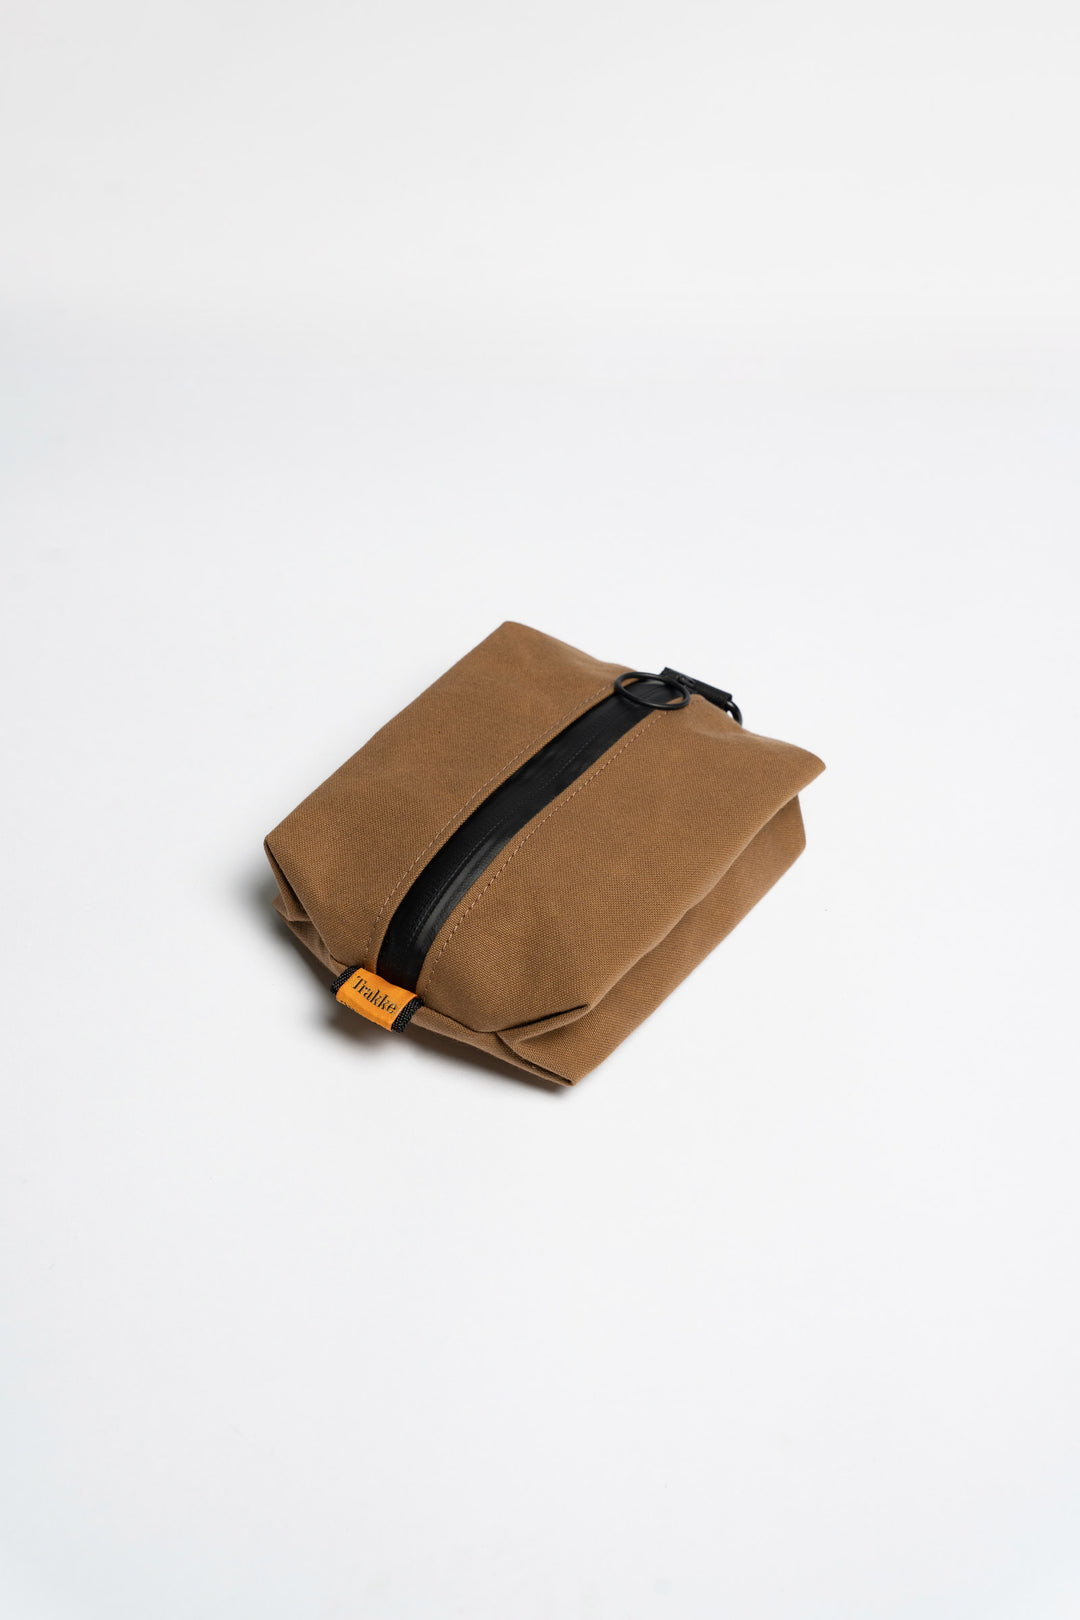 Foulden Pouch